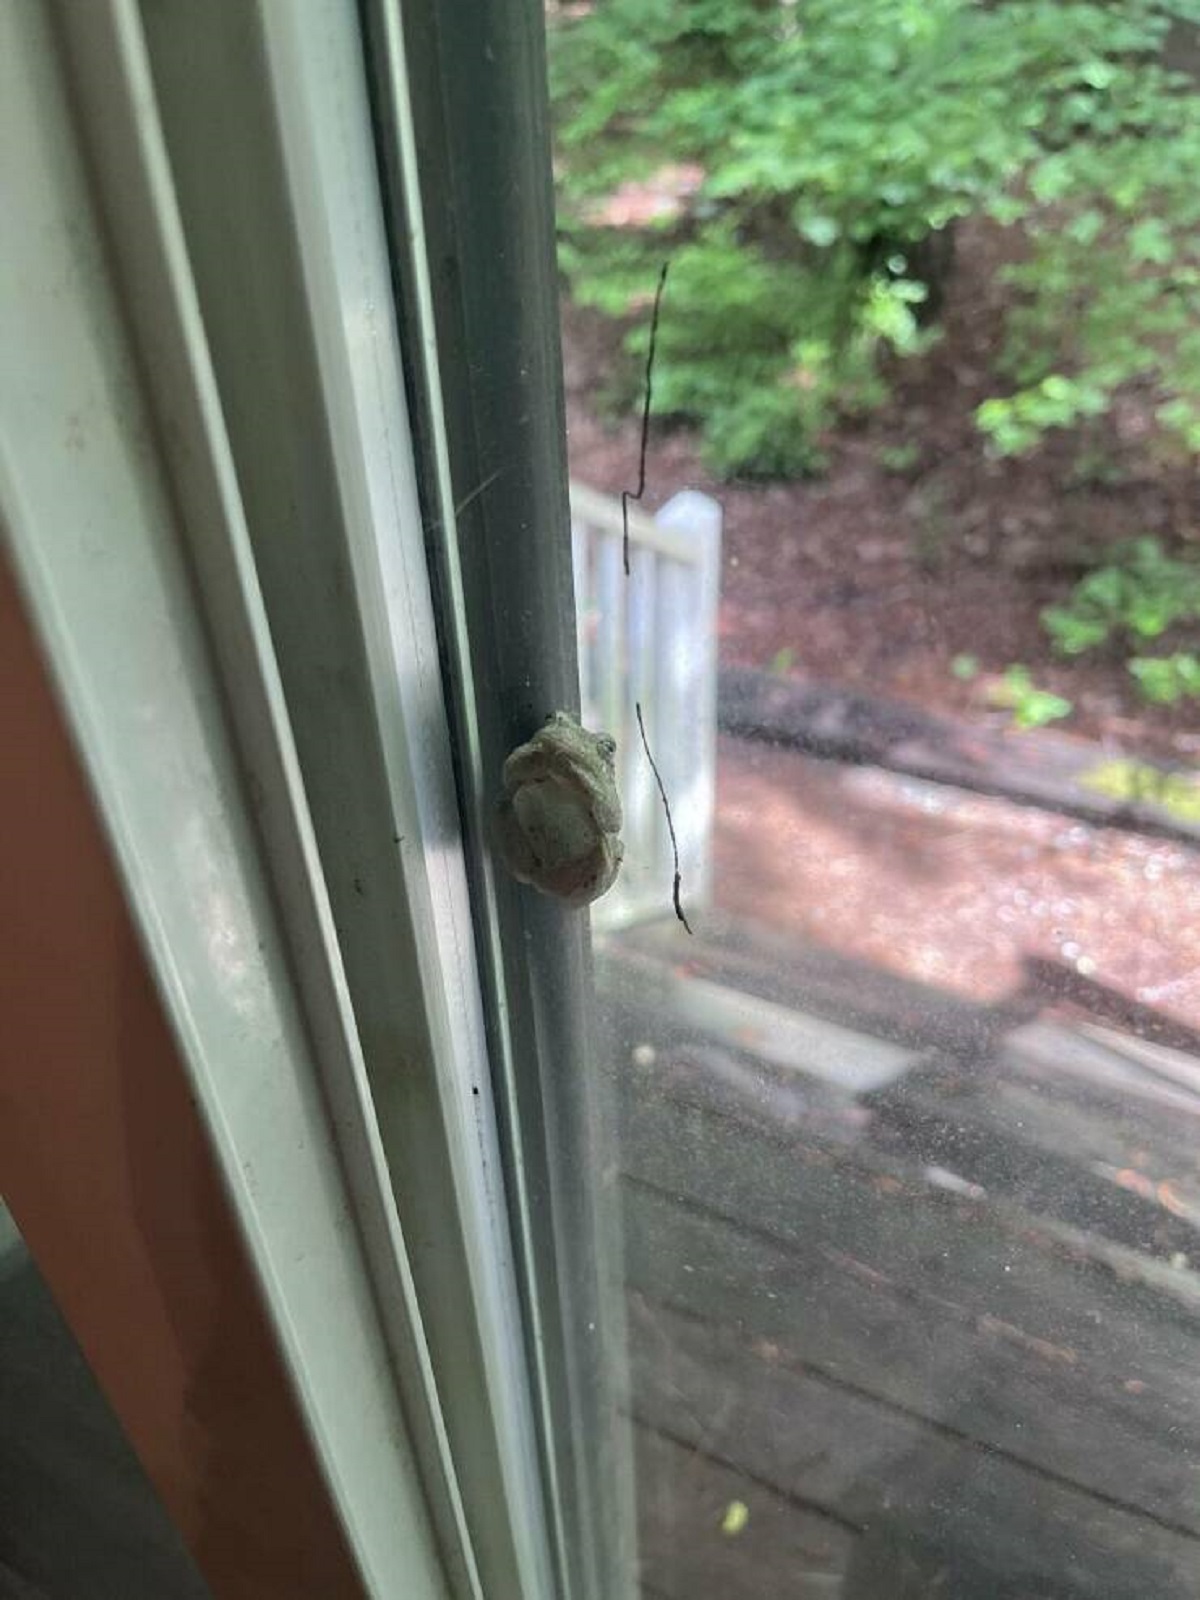 "I can't open my door without squishing this frog"